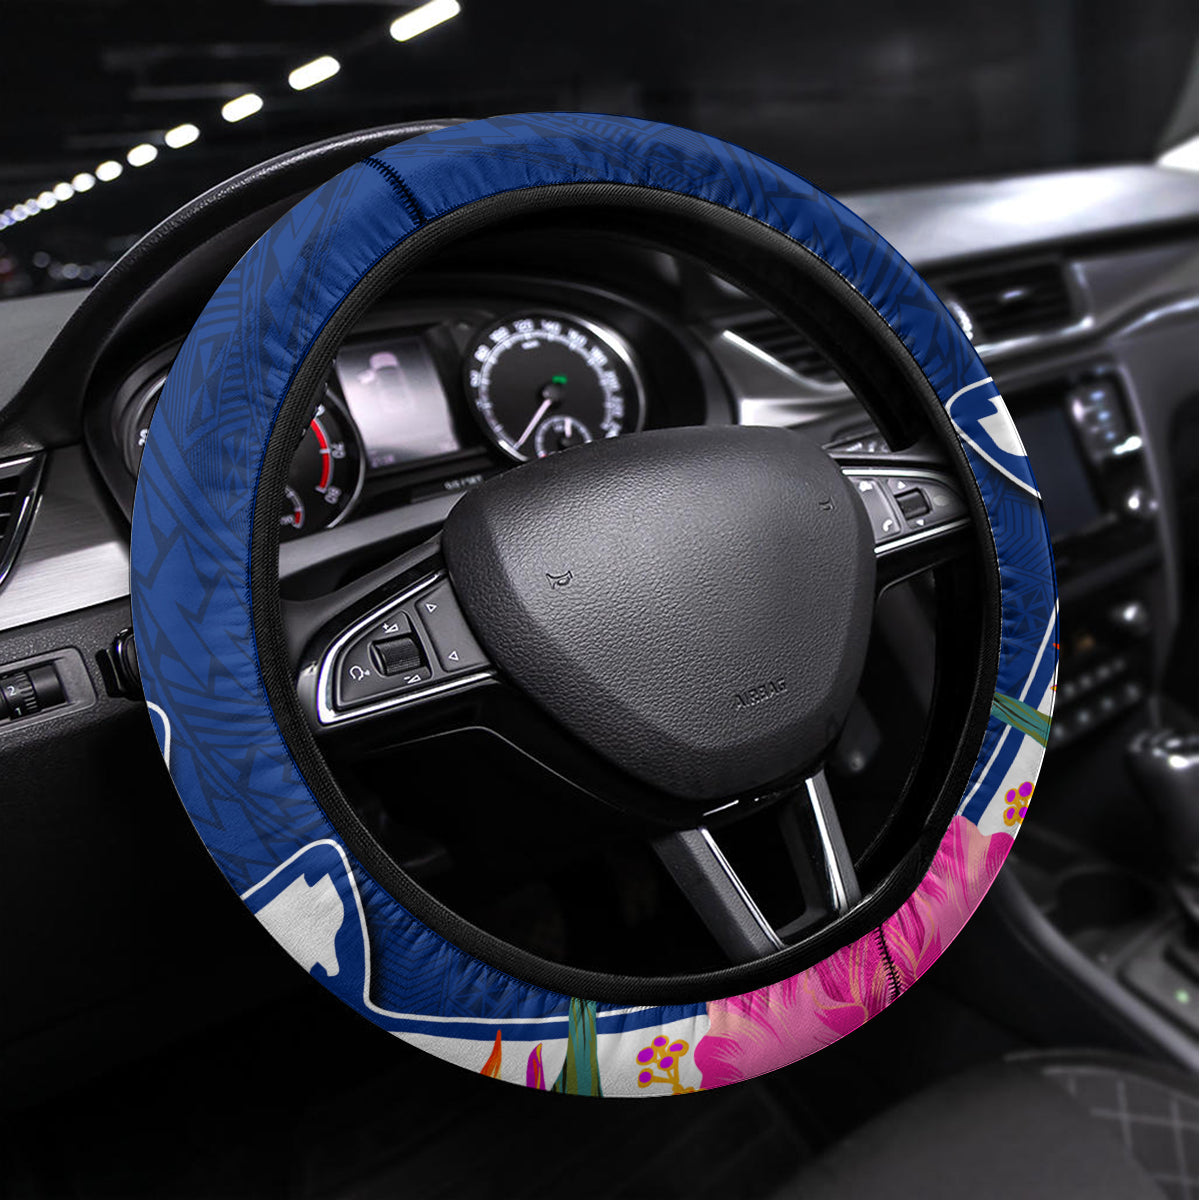 Guam Liberation Steering Wheel Cover Latte Stone and Guahan Seal Jungle Flower